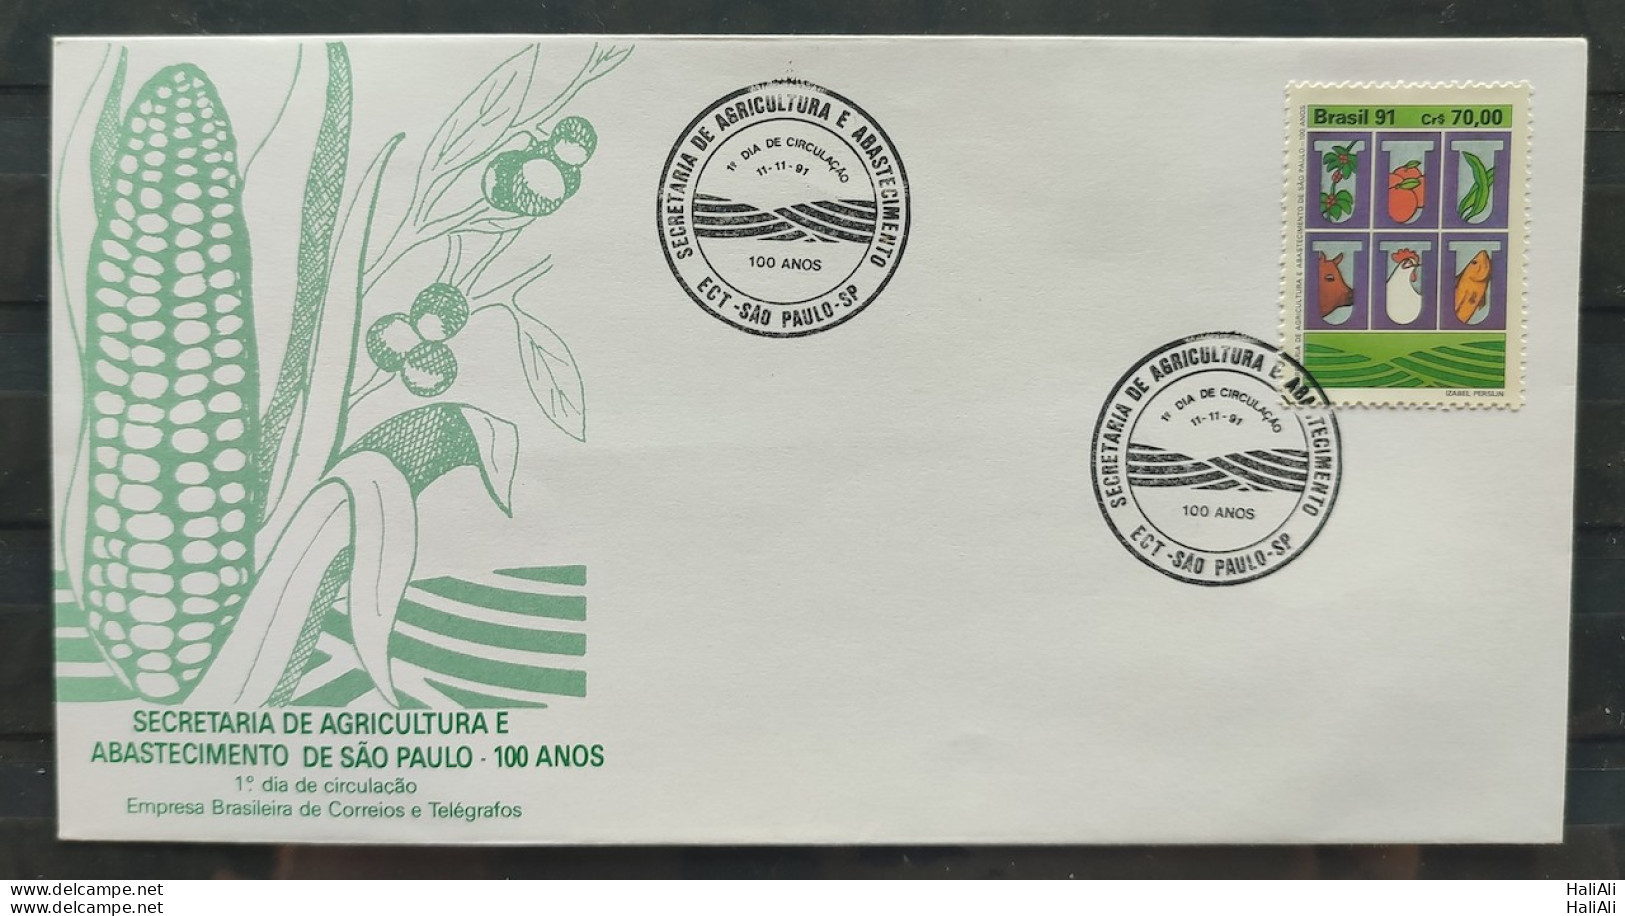 Brazil Envelope FDC FDC 547 1991 Agriculture Fish Pig Chicken Cbc Sp - FDC